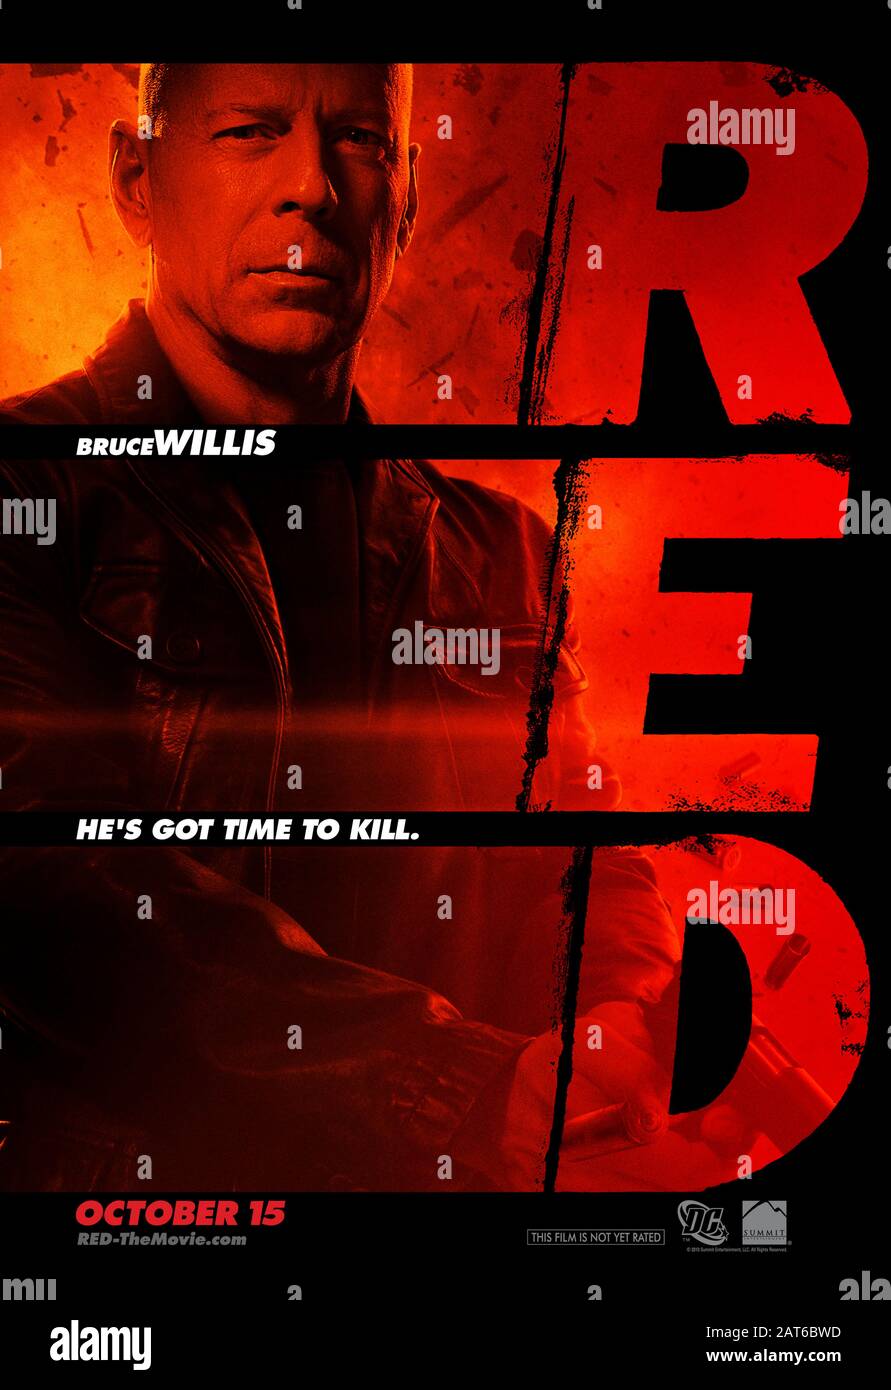 RED (2010) directed by Robert Schwentke and starring Bruce Willis as Frank Moses who is 'R.E.D.' - Retired Extremely Dangerous, based on the DC Comic book. Stock Photo